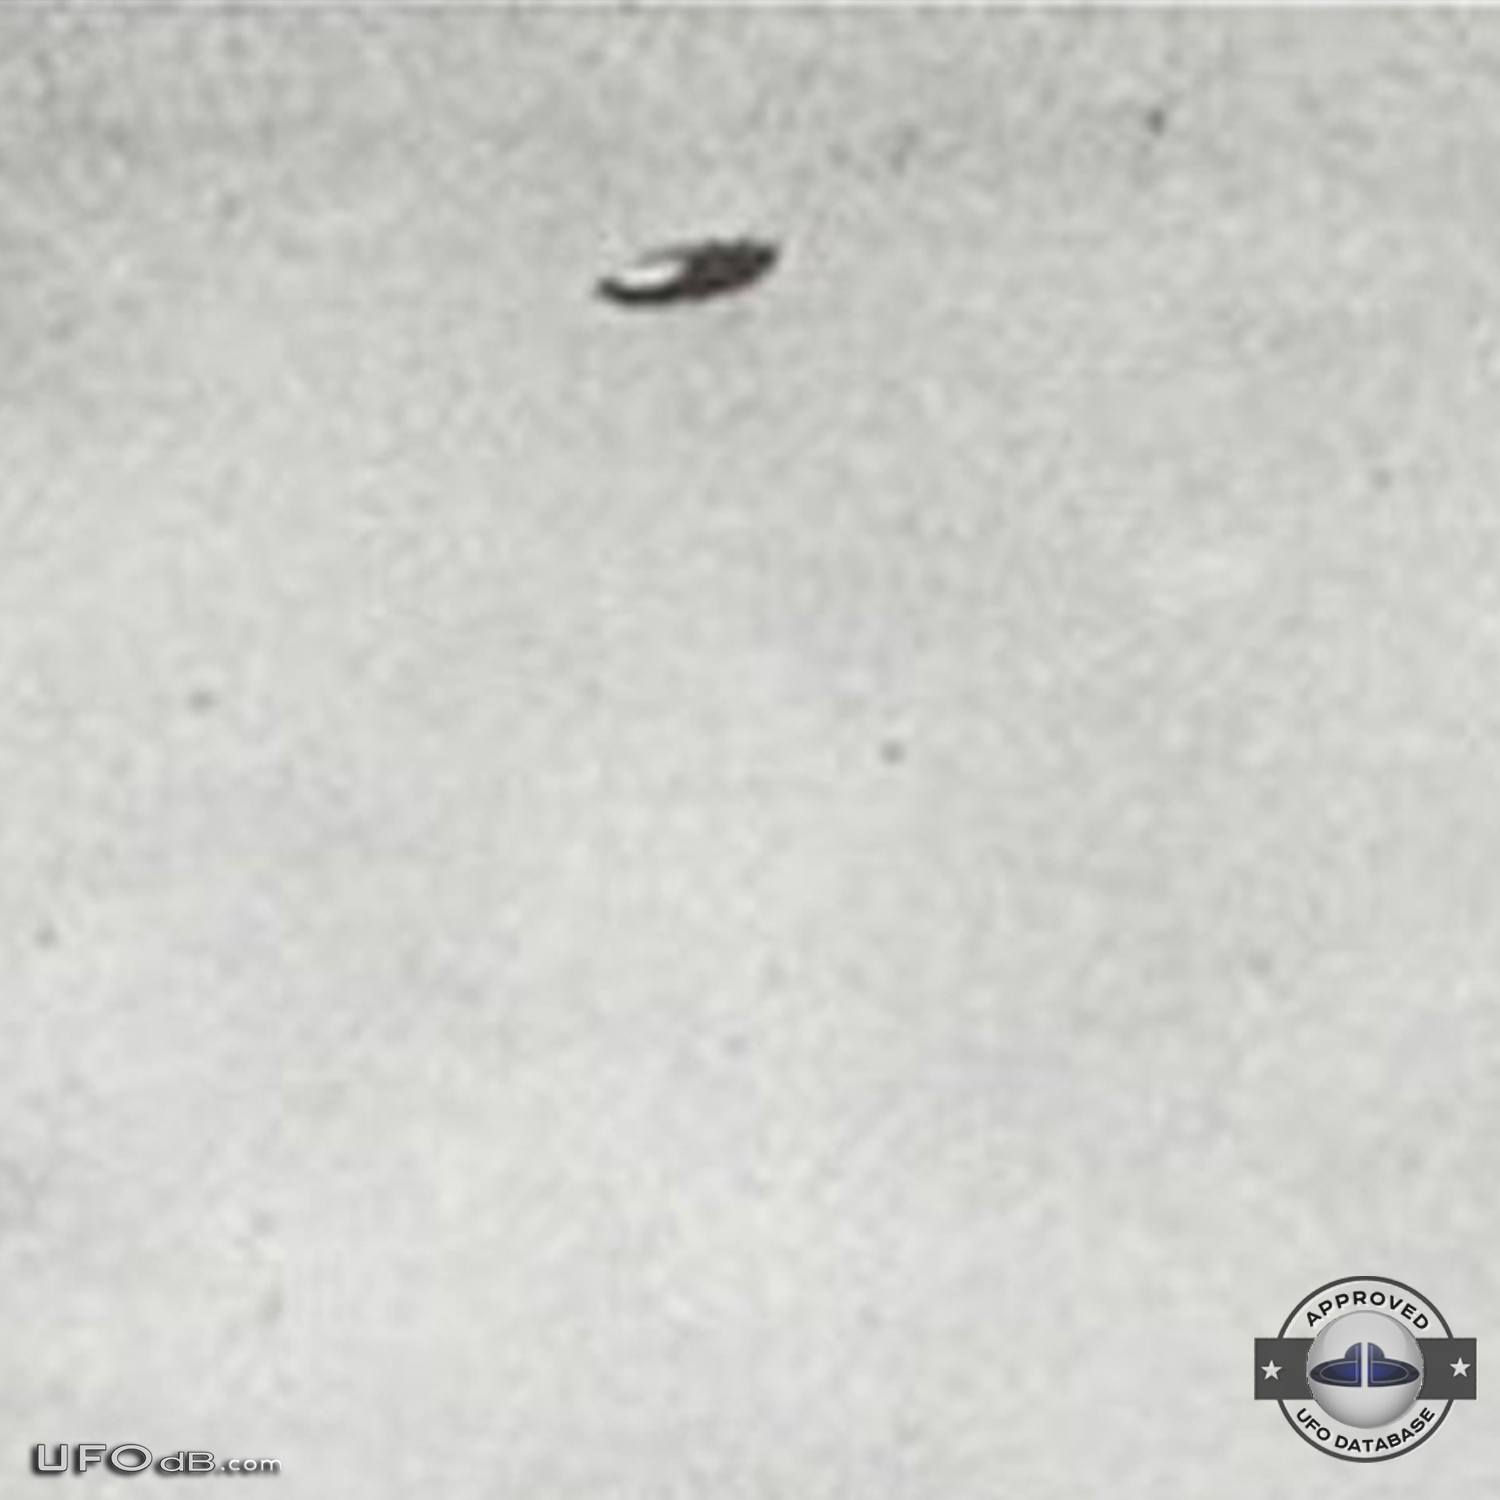 1967 Calgary UFO picture considered to be in the top 10 of all times UFO Picture #448-3